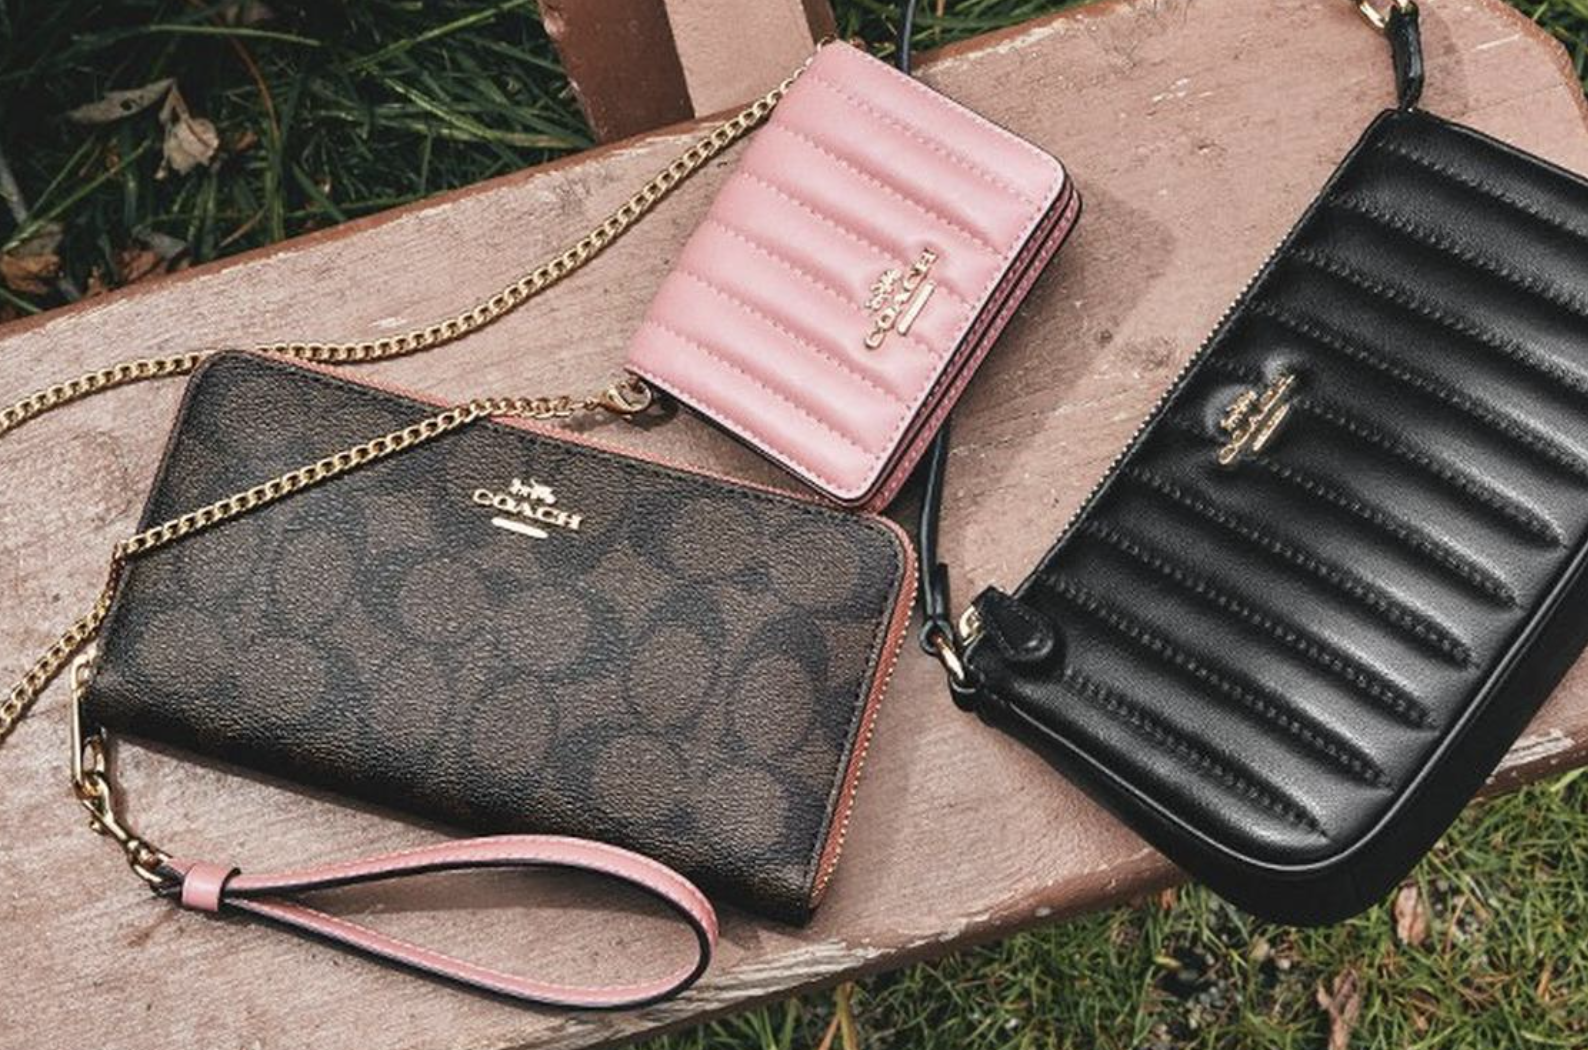 Coach Outlet sale: Up to 70% off all types of handbags, wallets